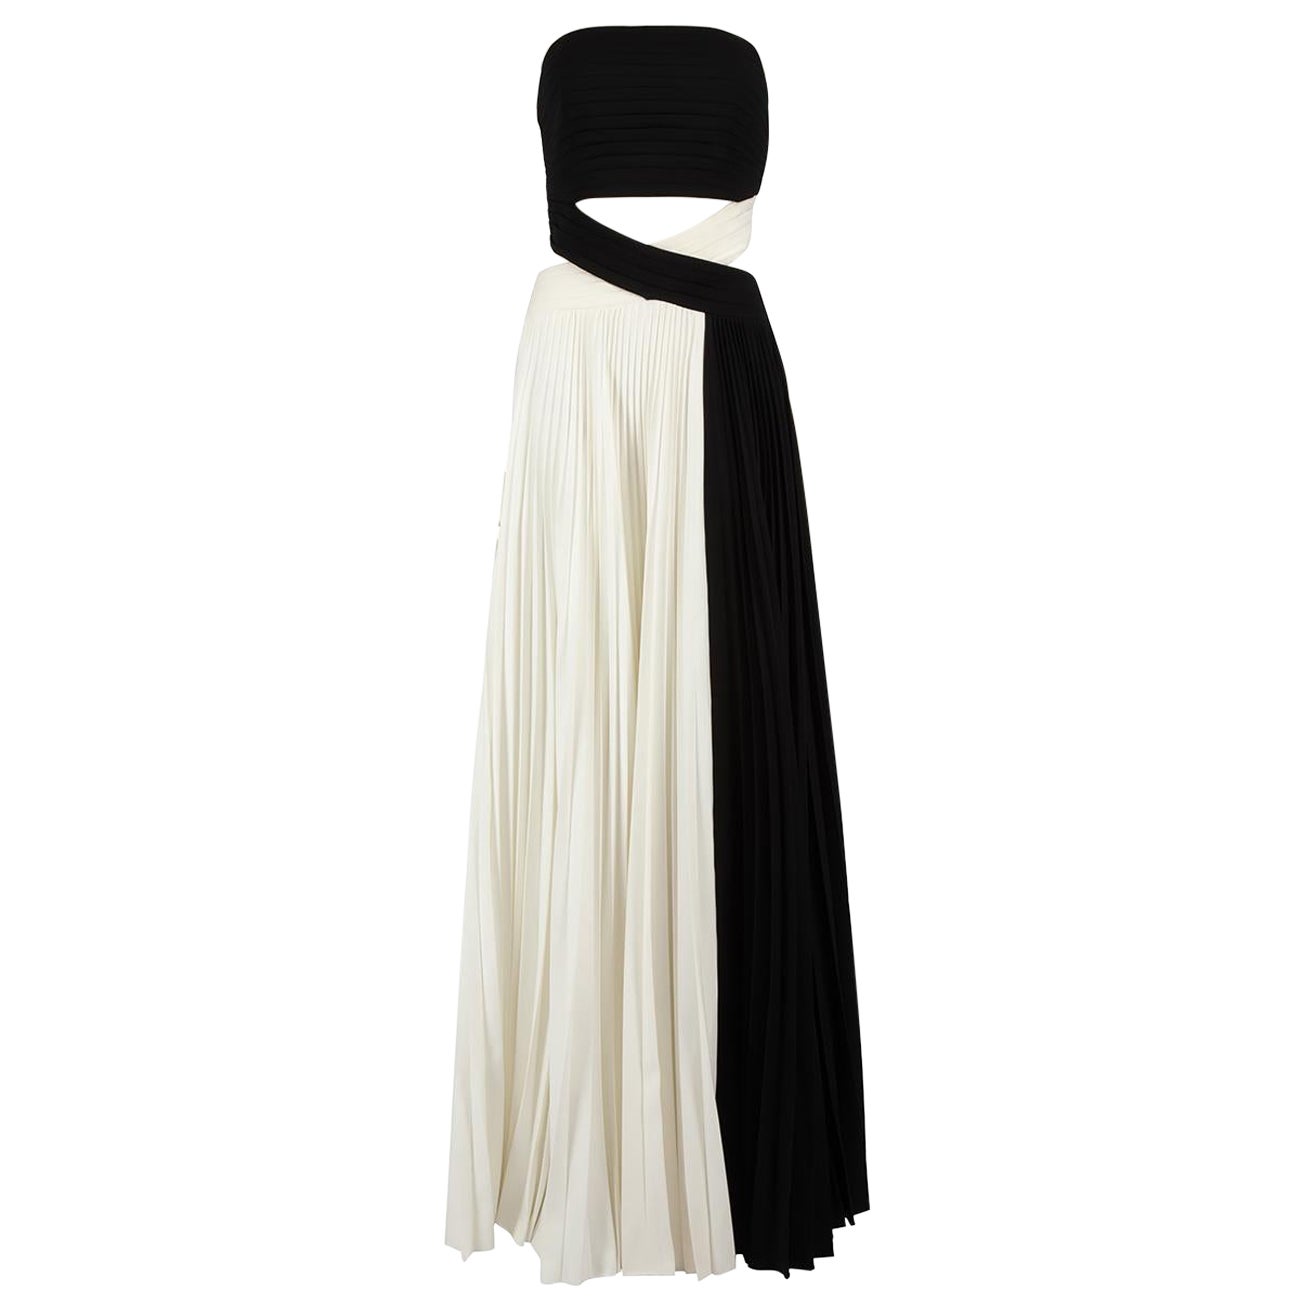 Honayda S/S23 Black & White Strapless Pleated Gown Size S For Sale